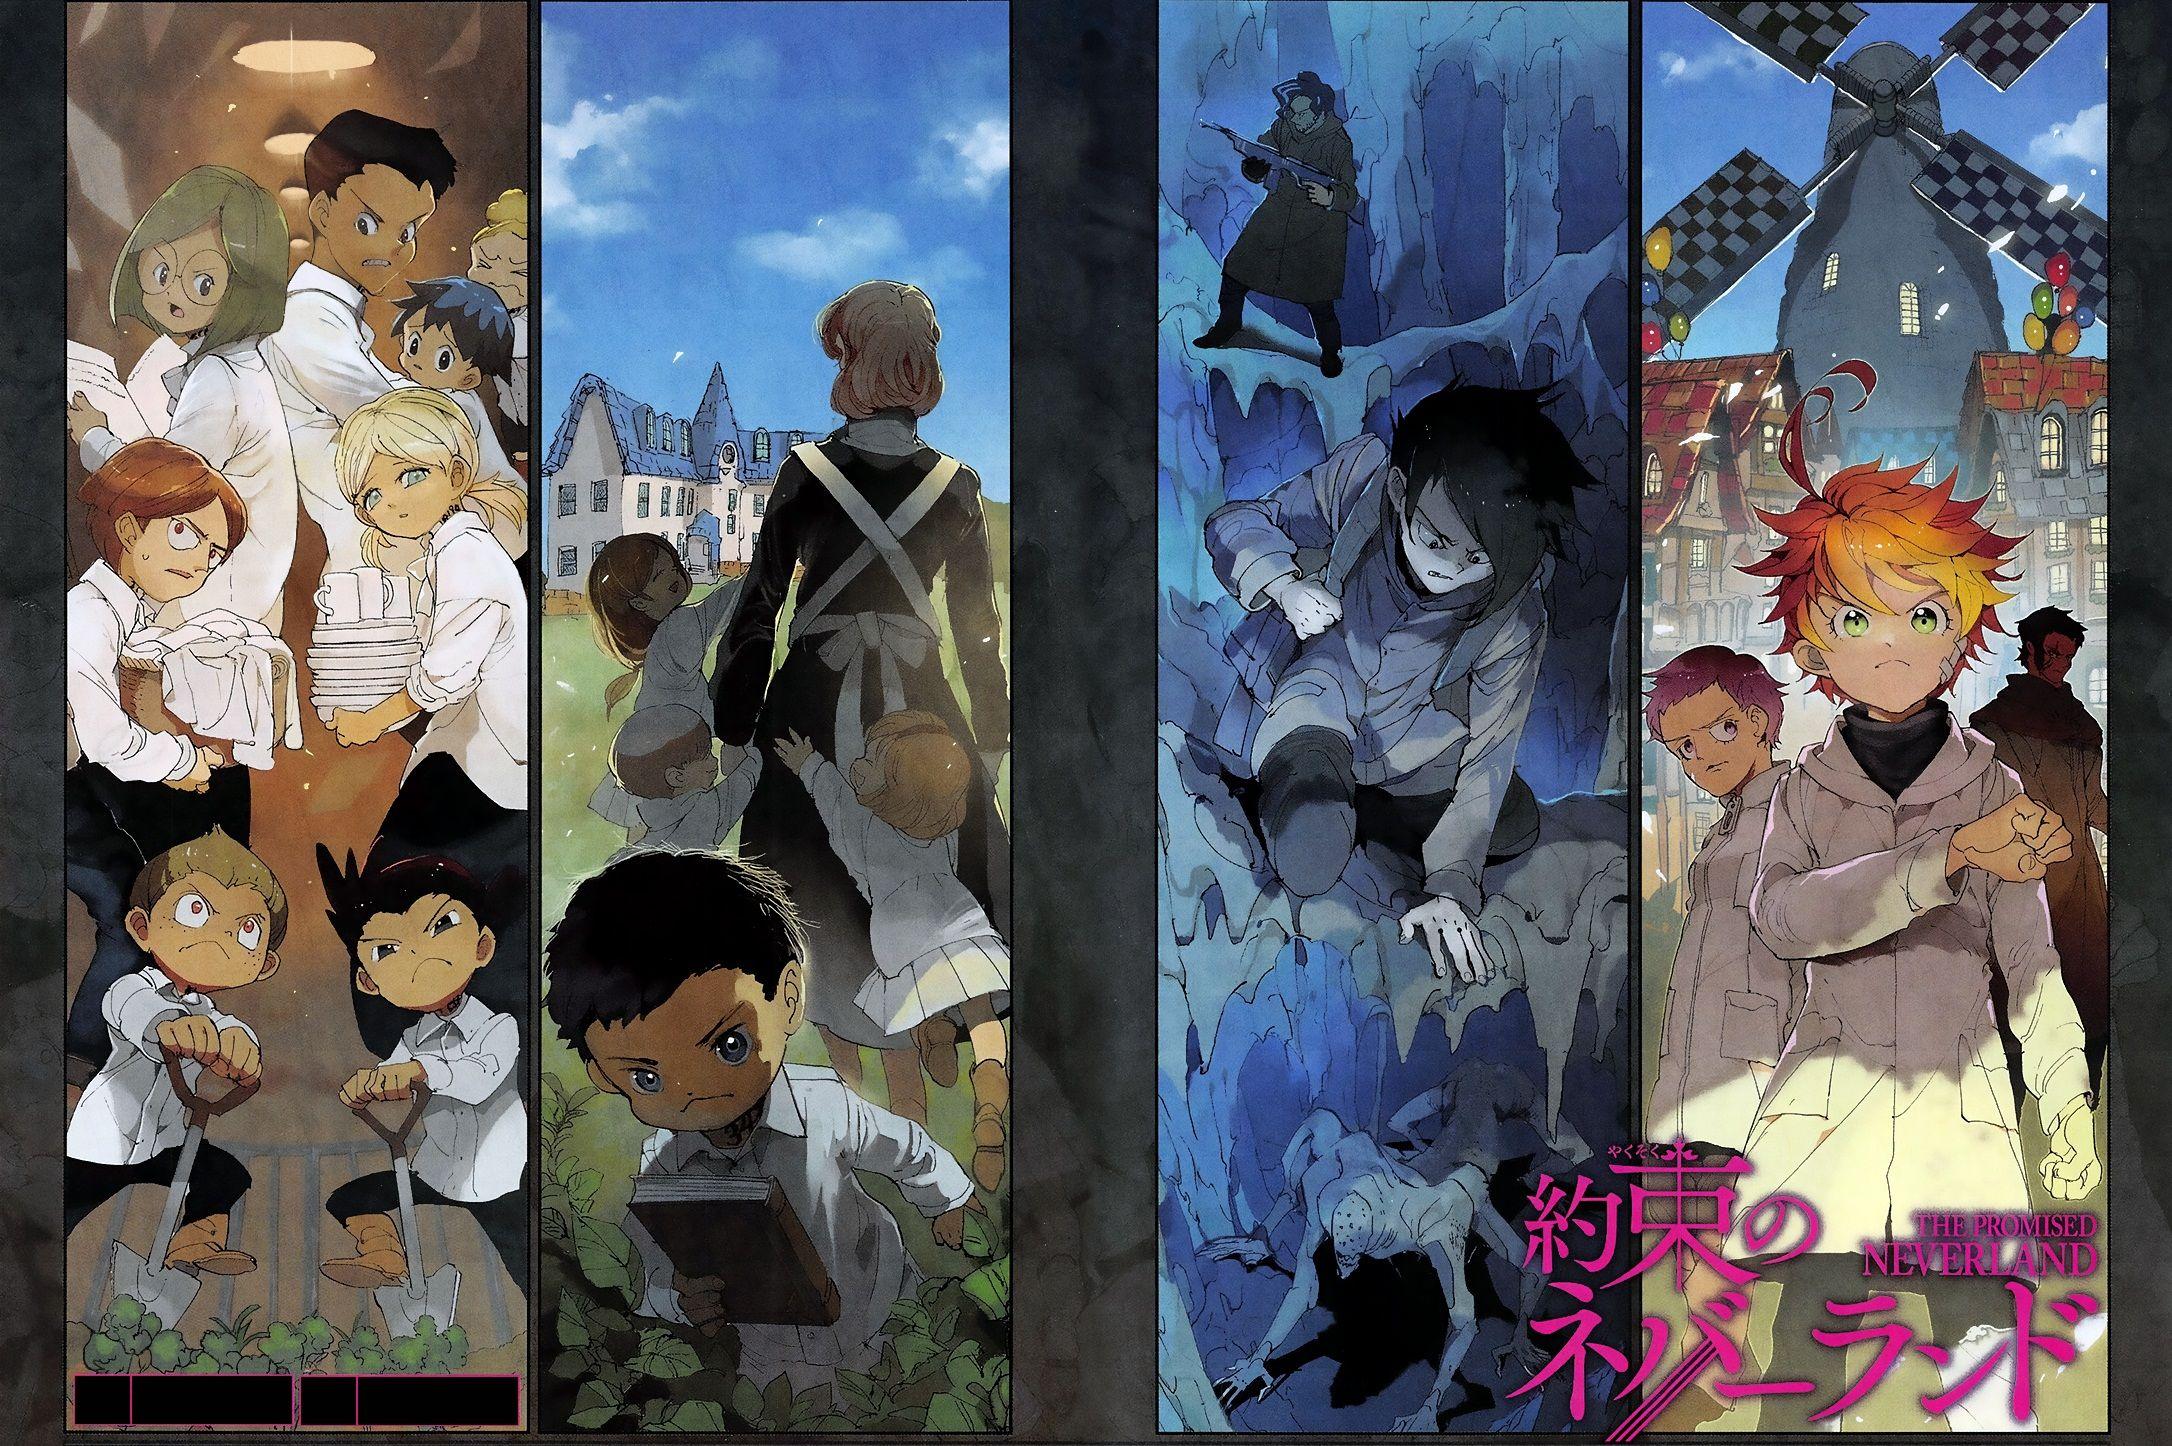 The Promised Neverland Background Image and Wallpaper